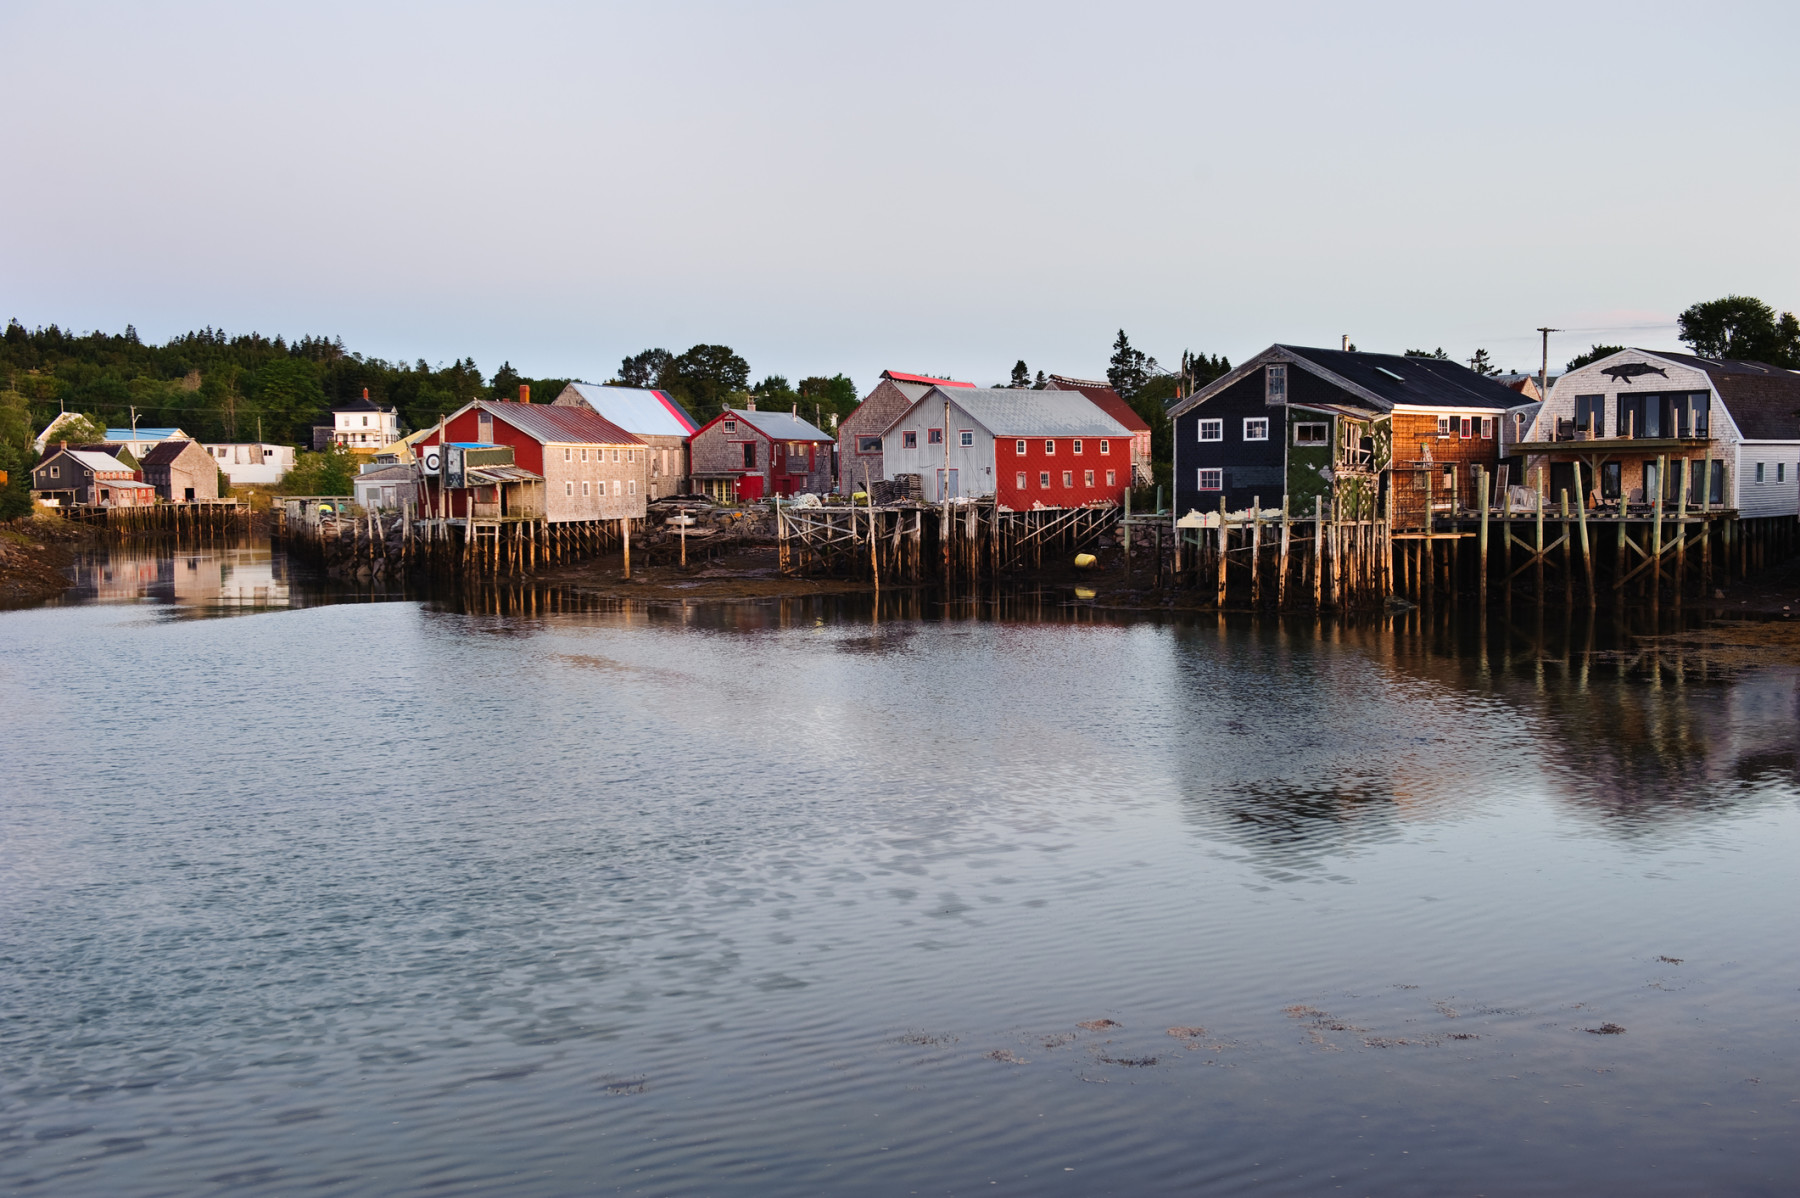 A view of some of the old herring smokehouses in Seal Cove, an old fishing village on Grand Manan, New Brunswick. (Marc Guitard/ Moment/ Getty Images) 